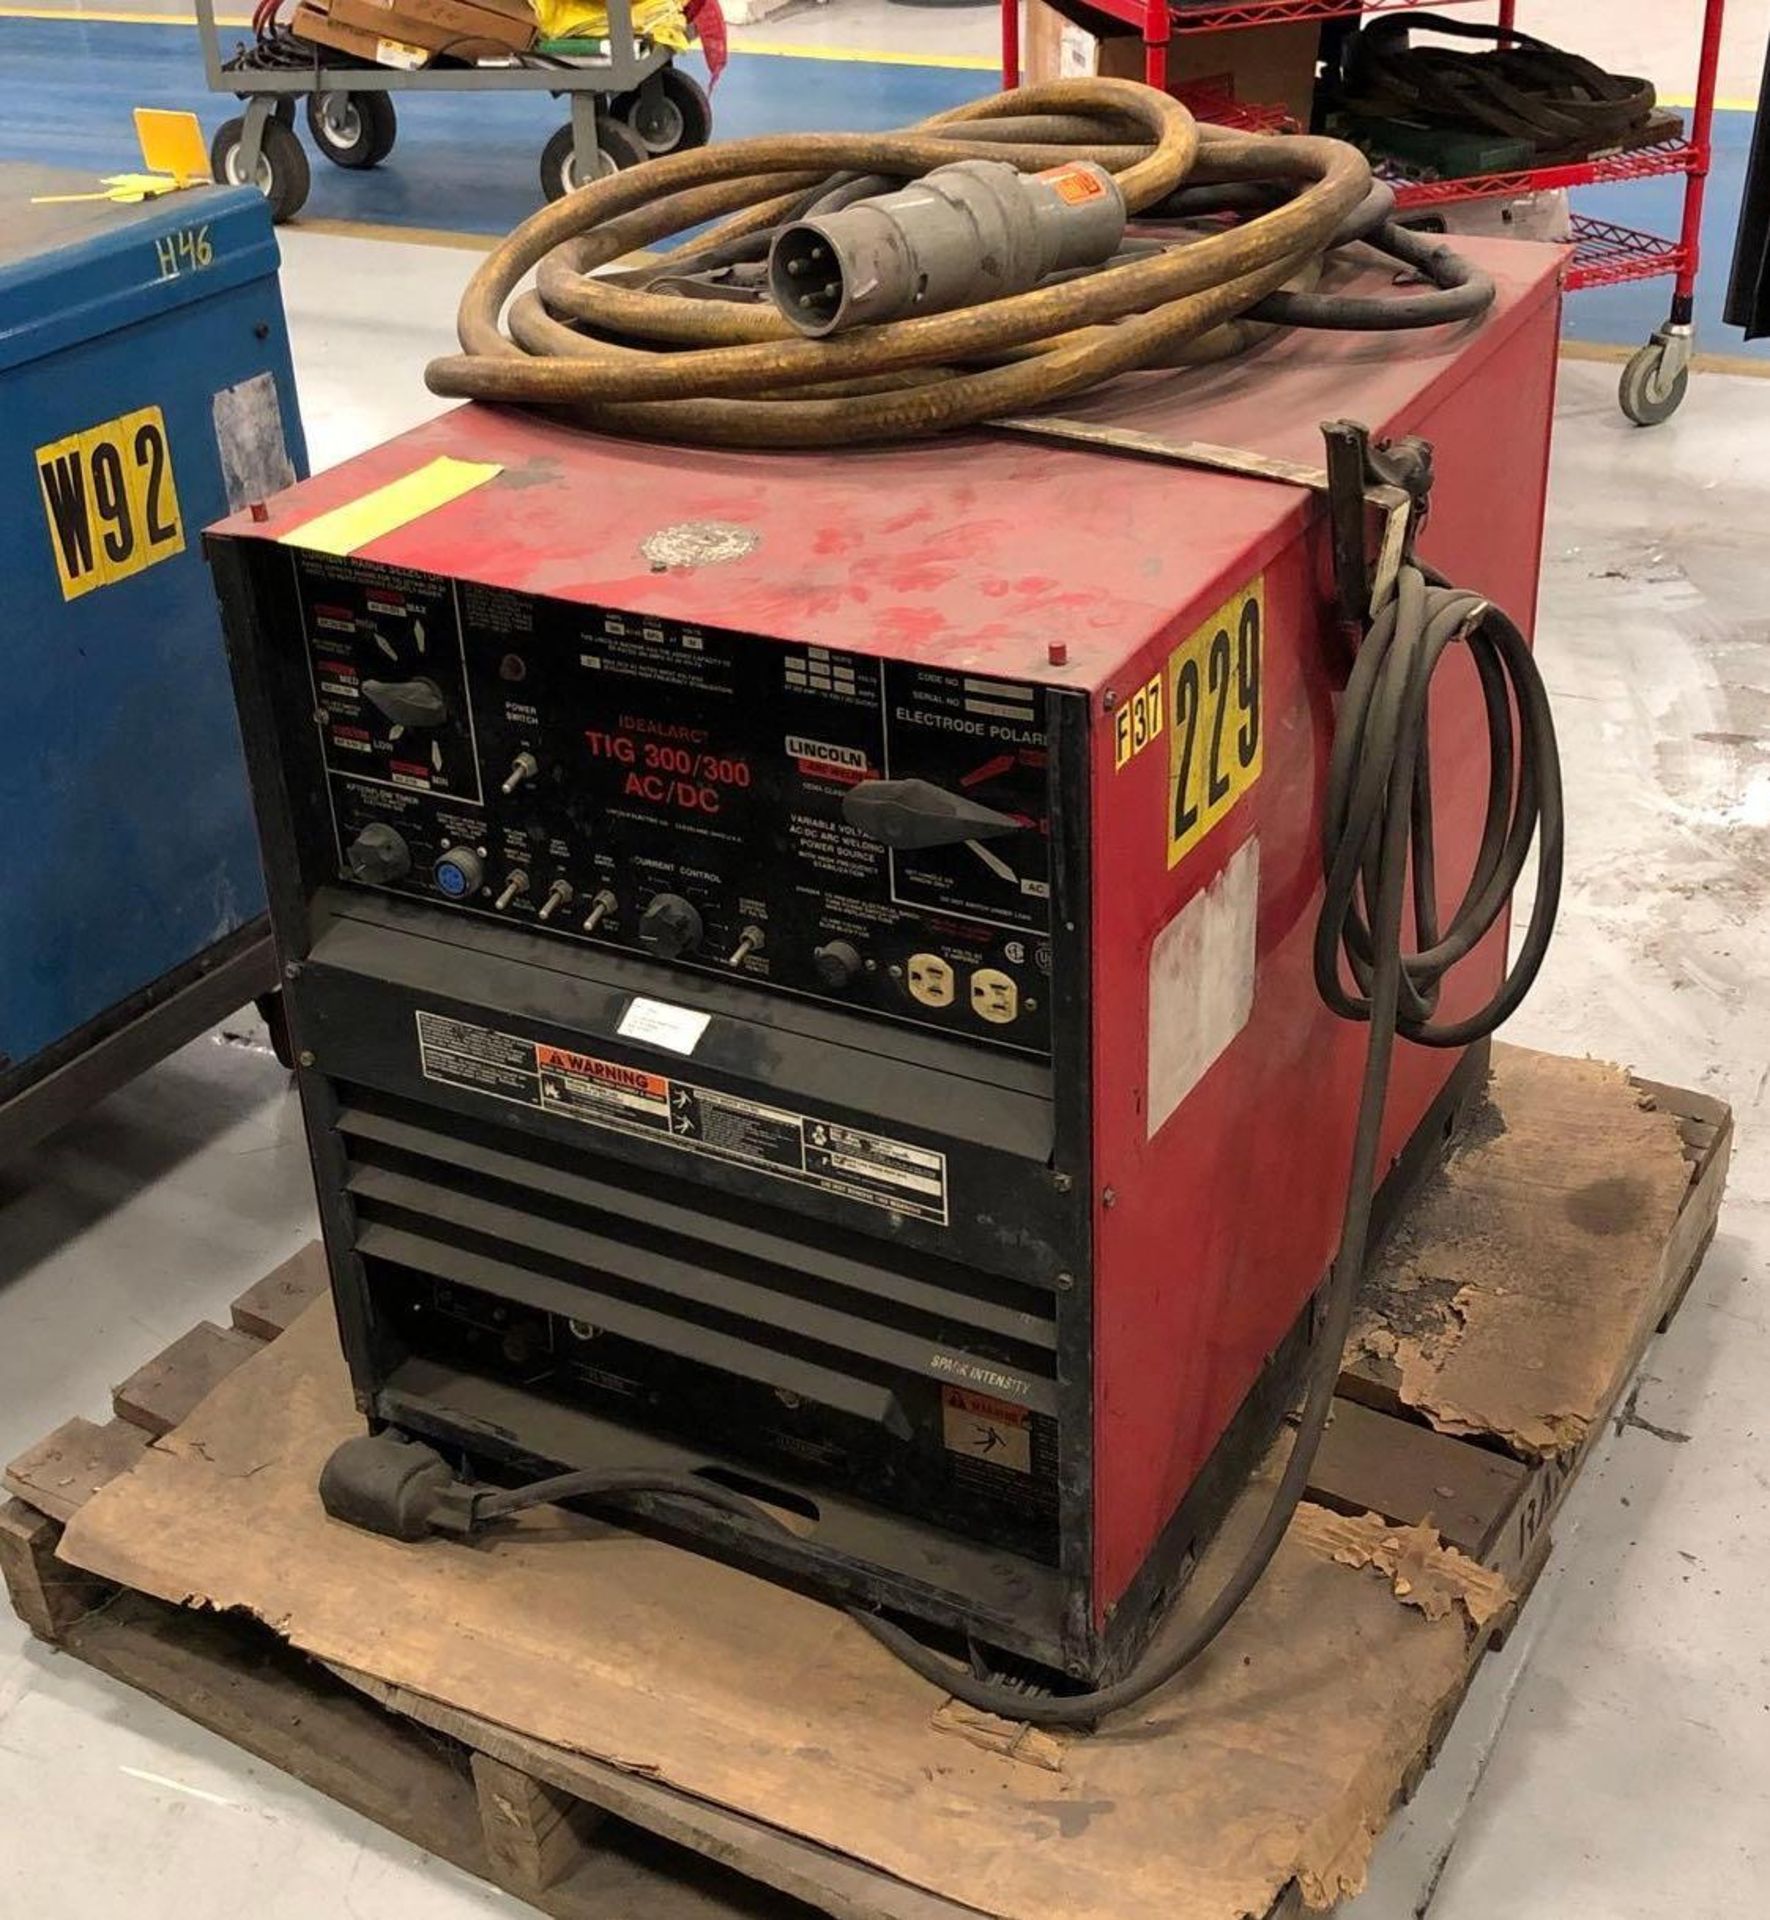 Lincoln 300Amp Idealarc TIG 300/300 Power Supply w/ Cables - Image 2 of 16